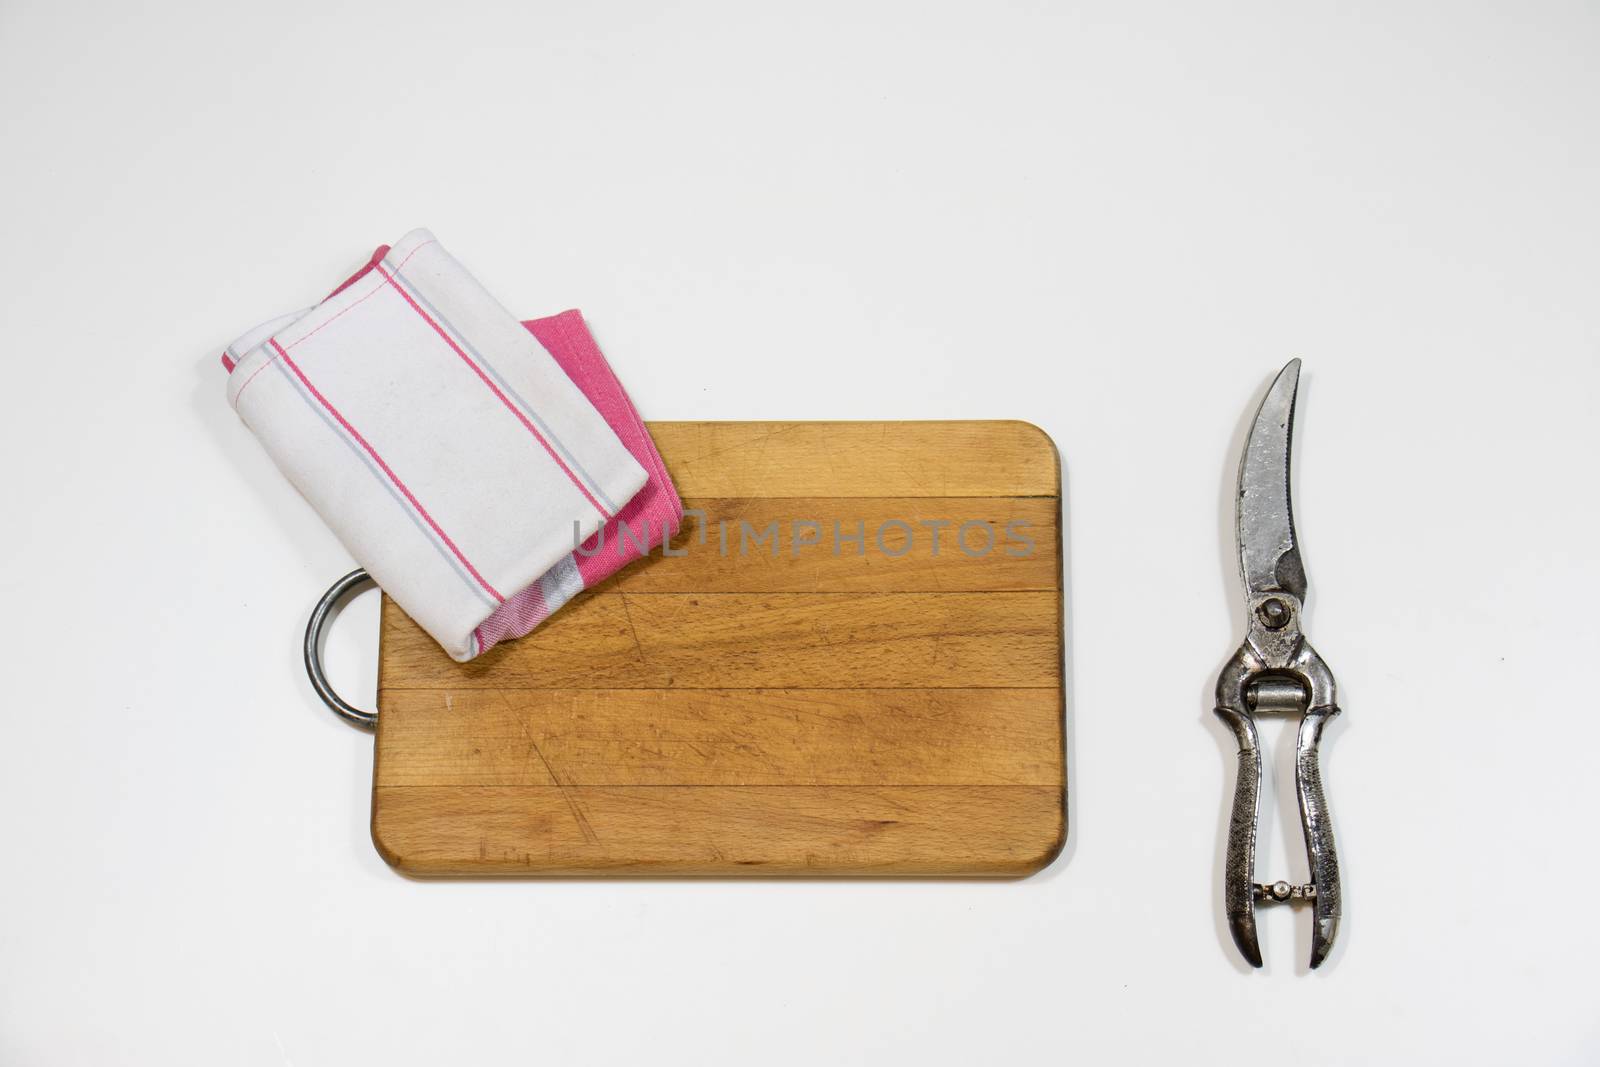 Old chopper and board, tools for butcher, white background.